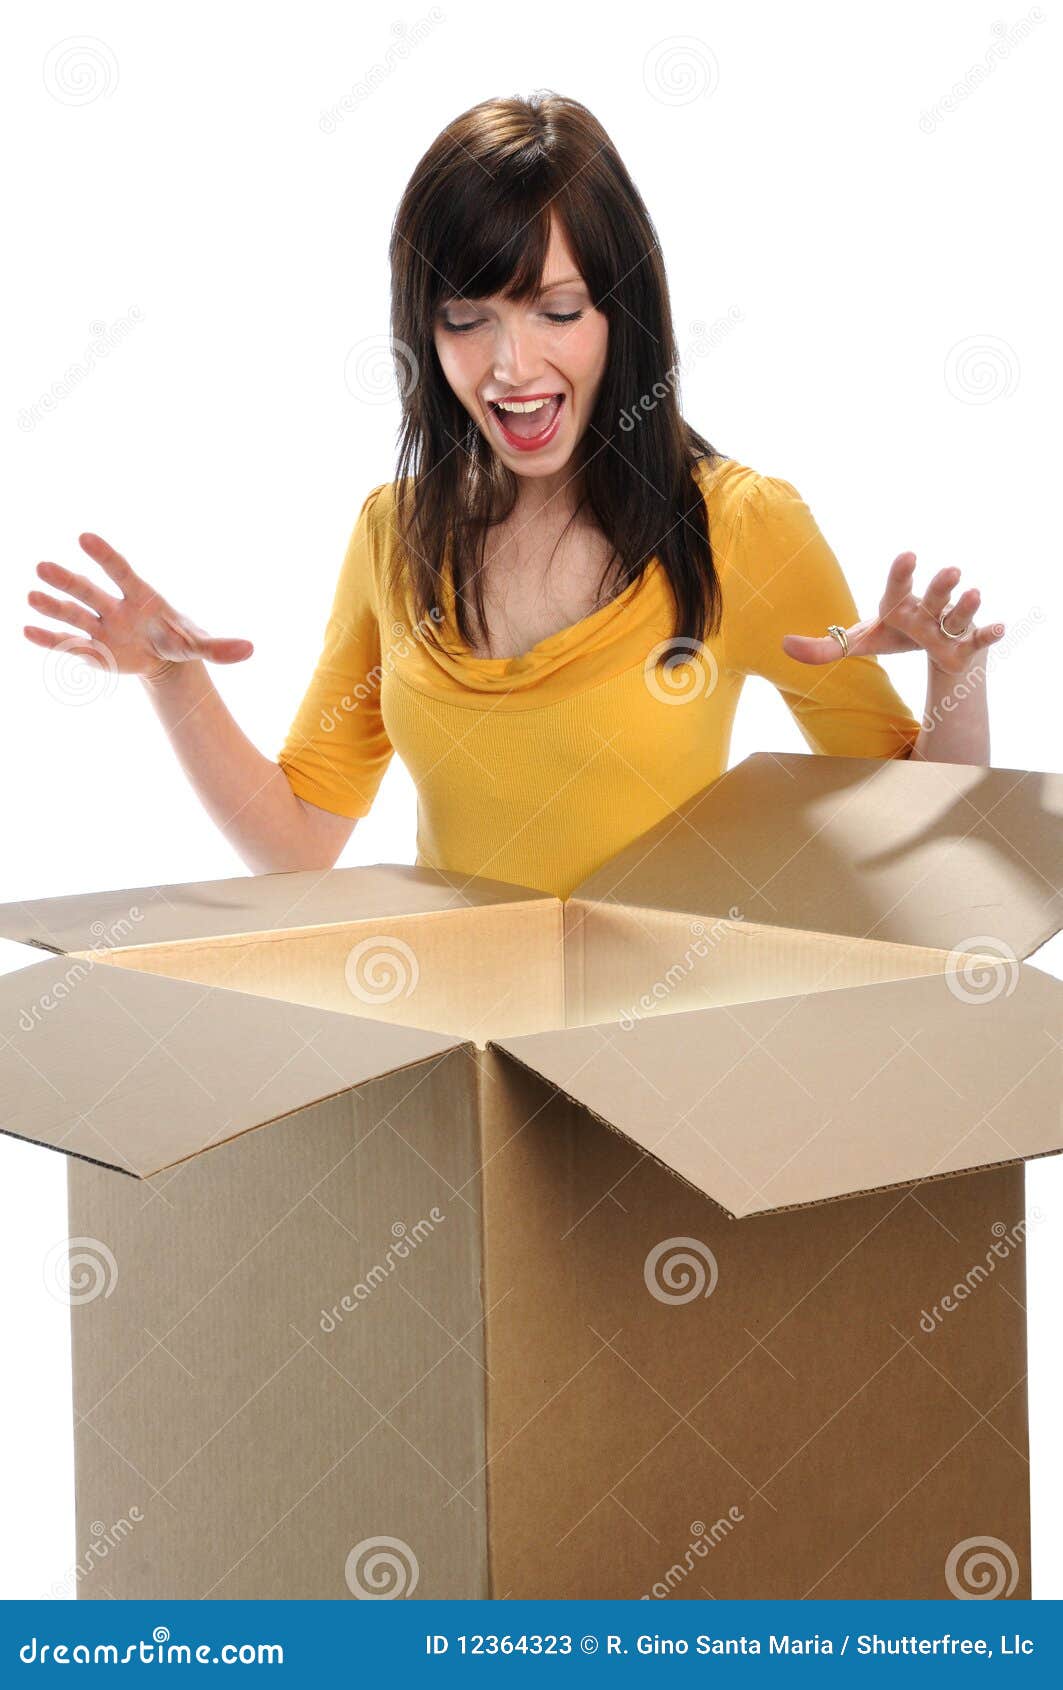 A Smiling Young Woman Opening Cardboard Box With A Box Cutter At Home  Delivered Gift By Air Mail Stock Photo, Picture and Royalty Free Image.  Image 101537170.